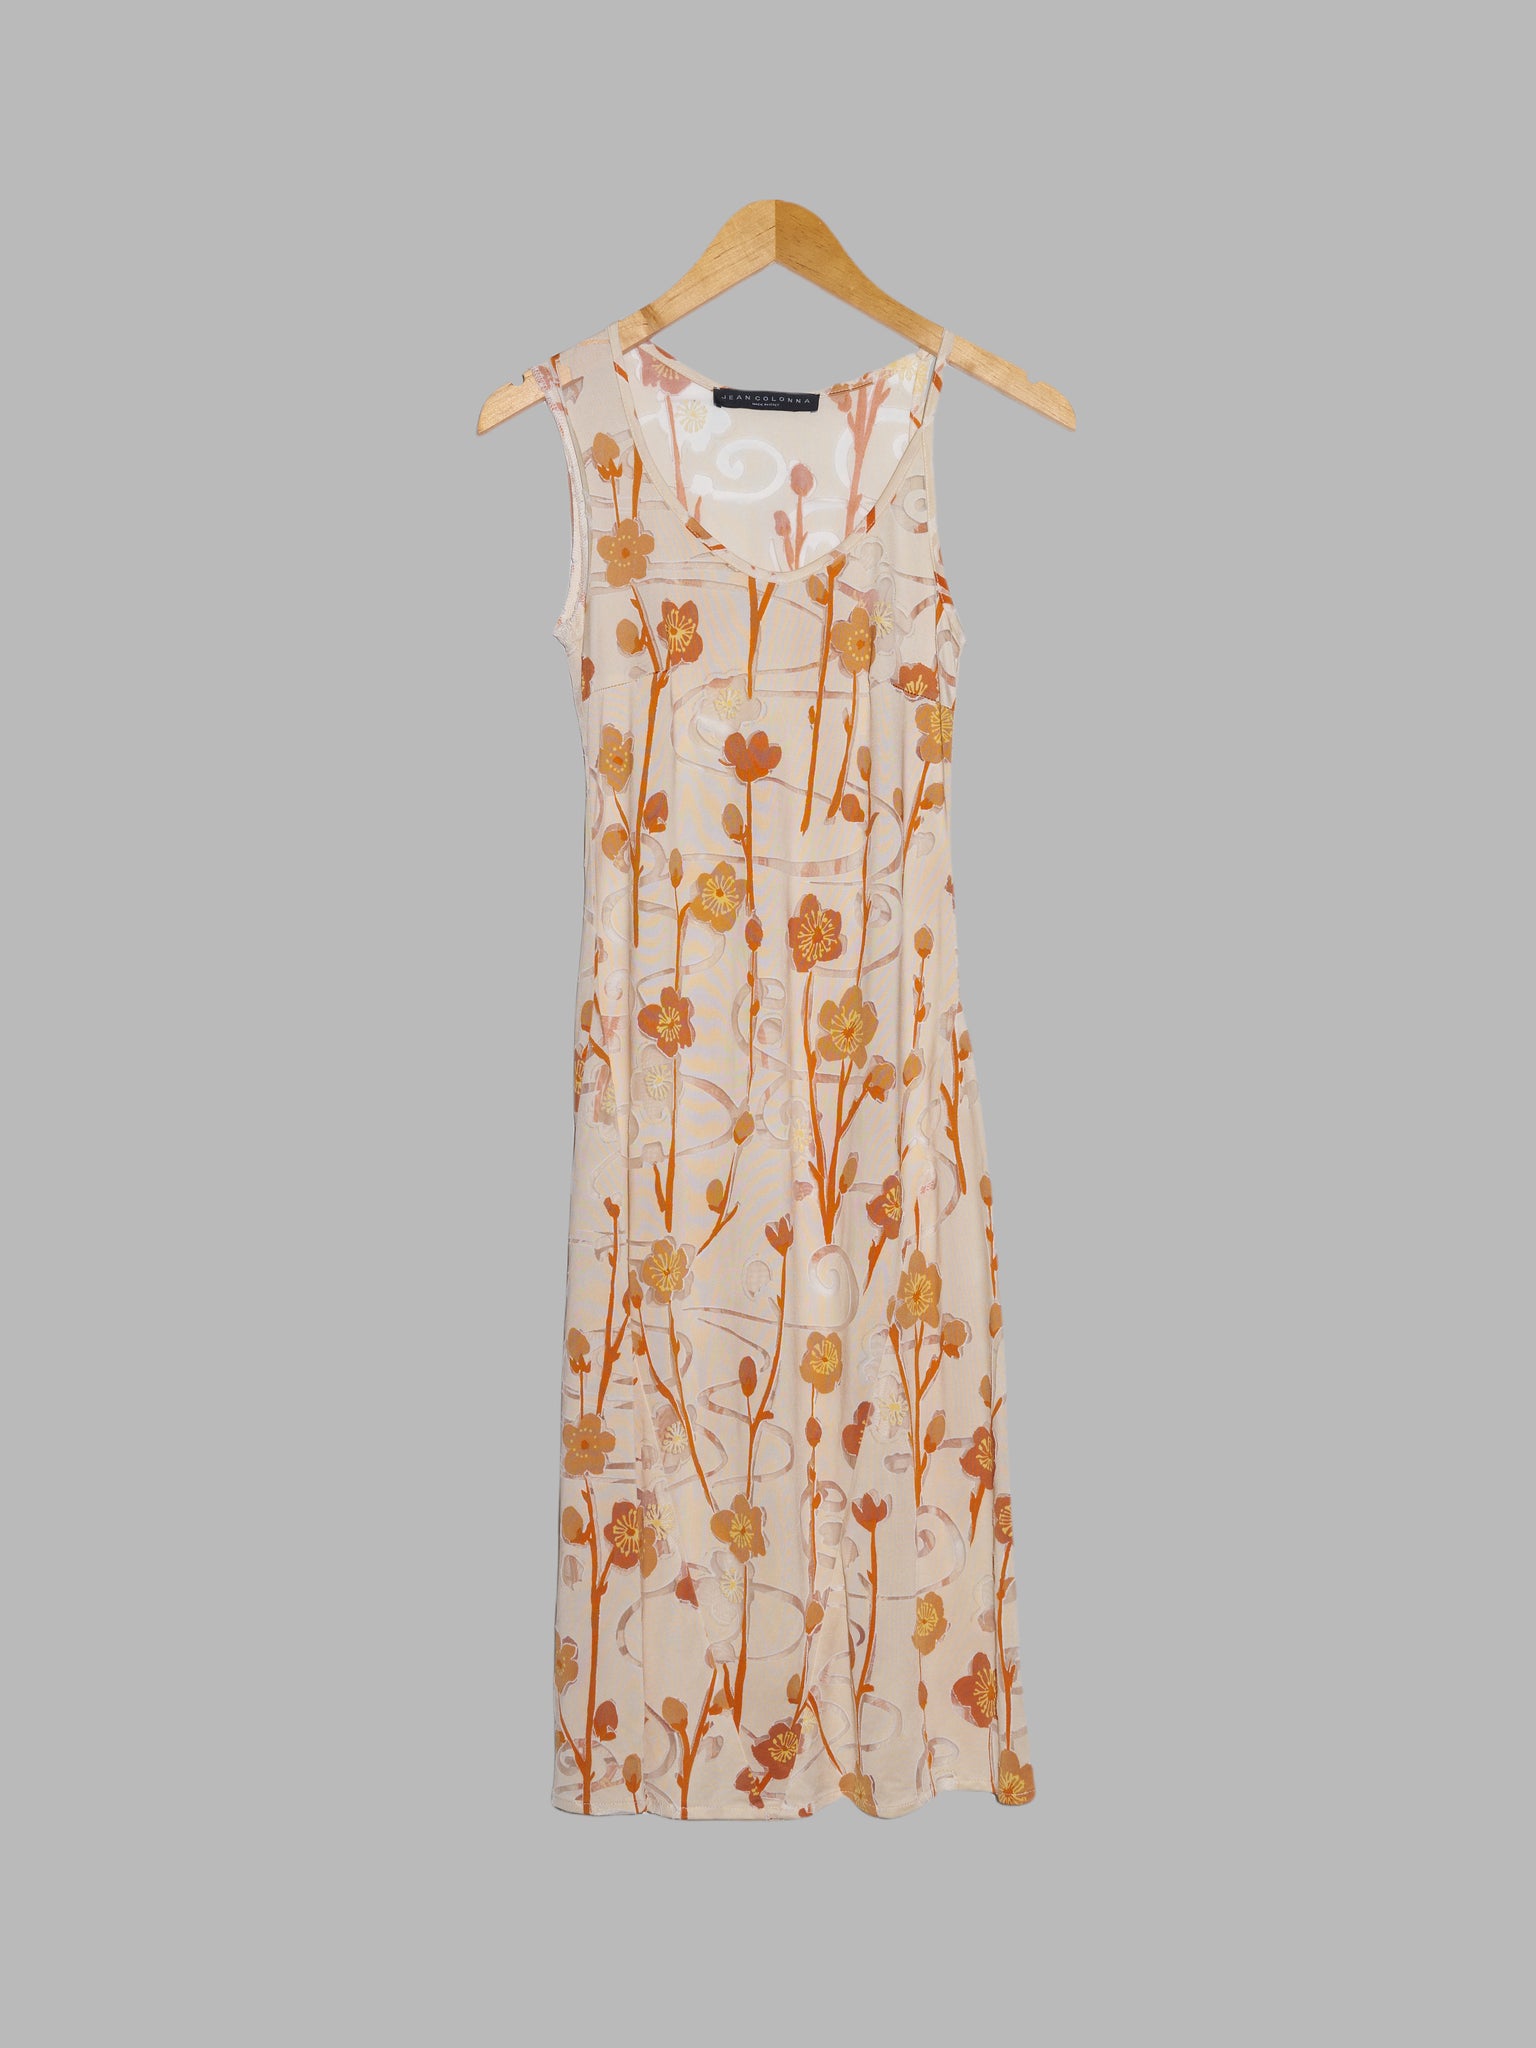 Jean Colonna SS1998 floral burnout sleeveless dress with asymmetrical shoulder